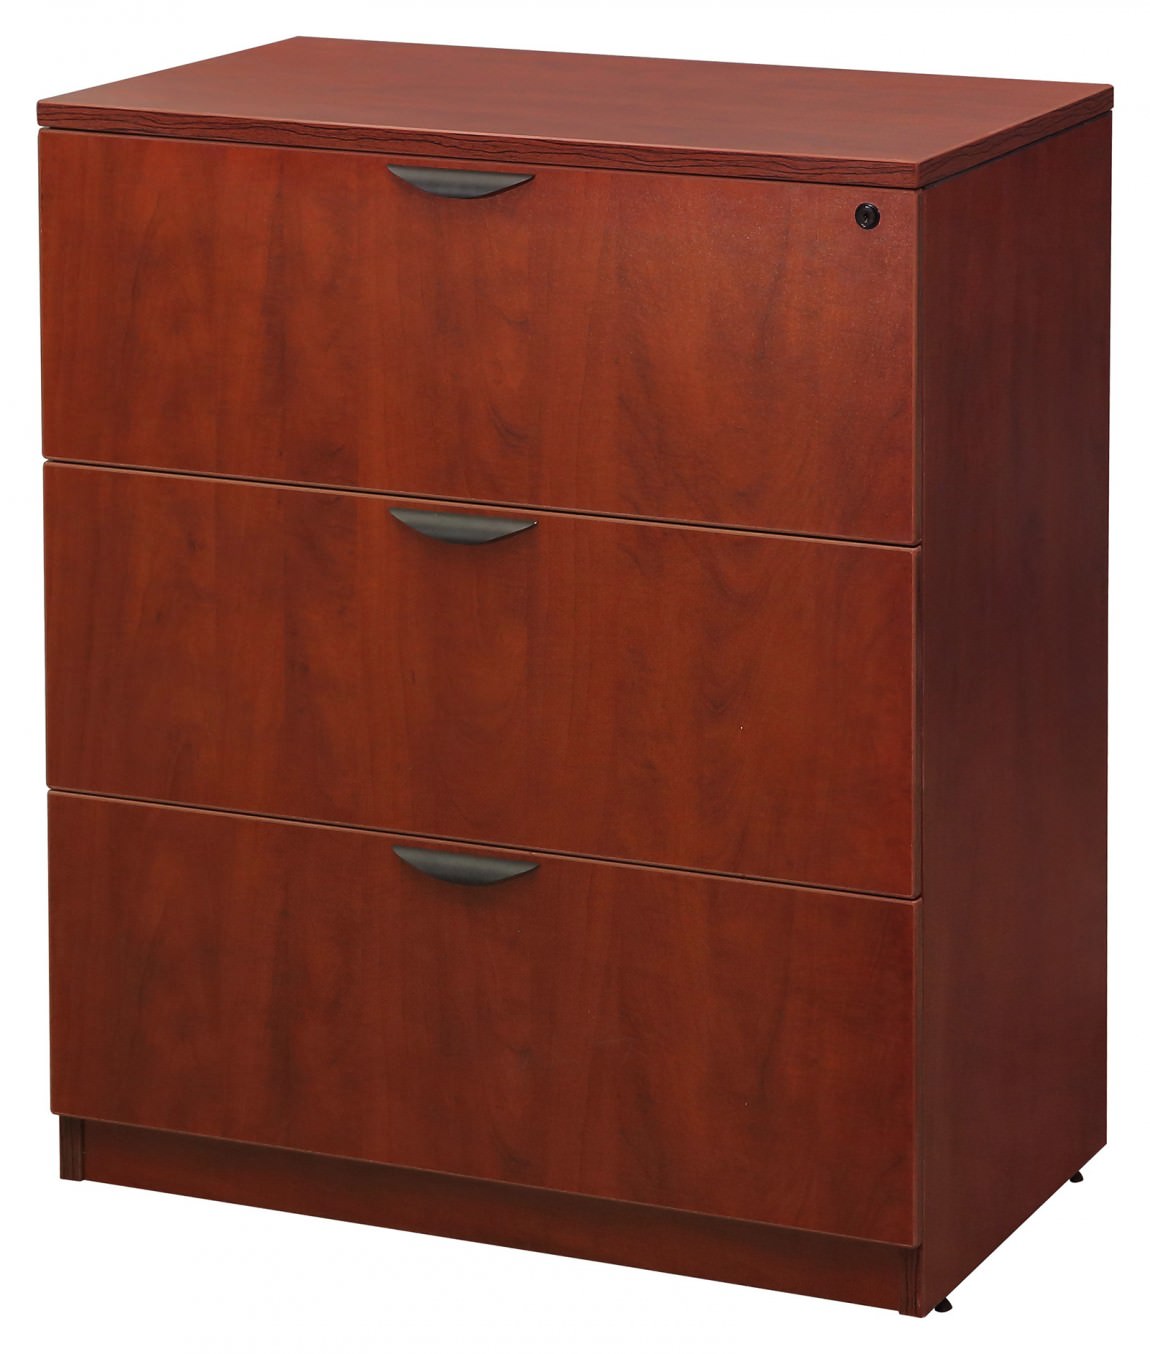 3 Drawer Lateral Filing Cabinet by Express Office Furniture